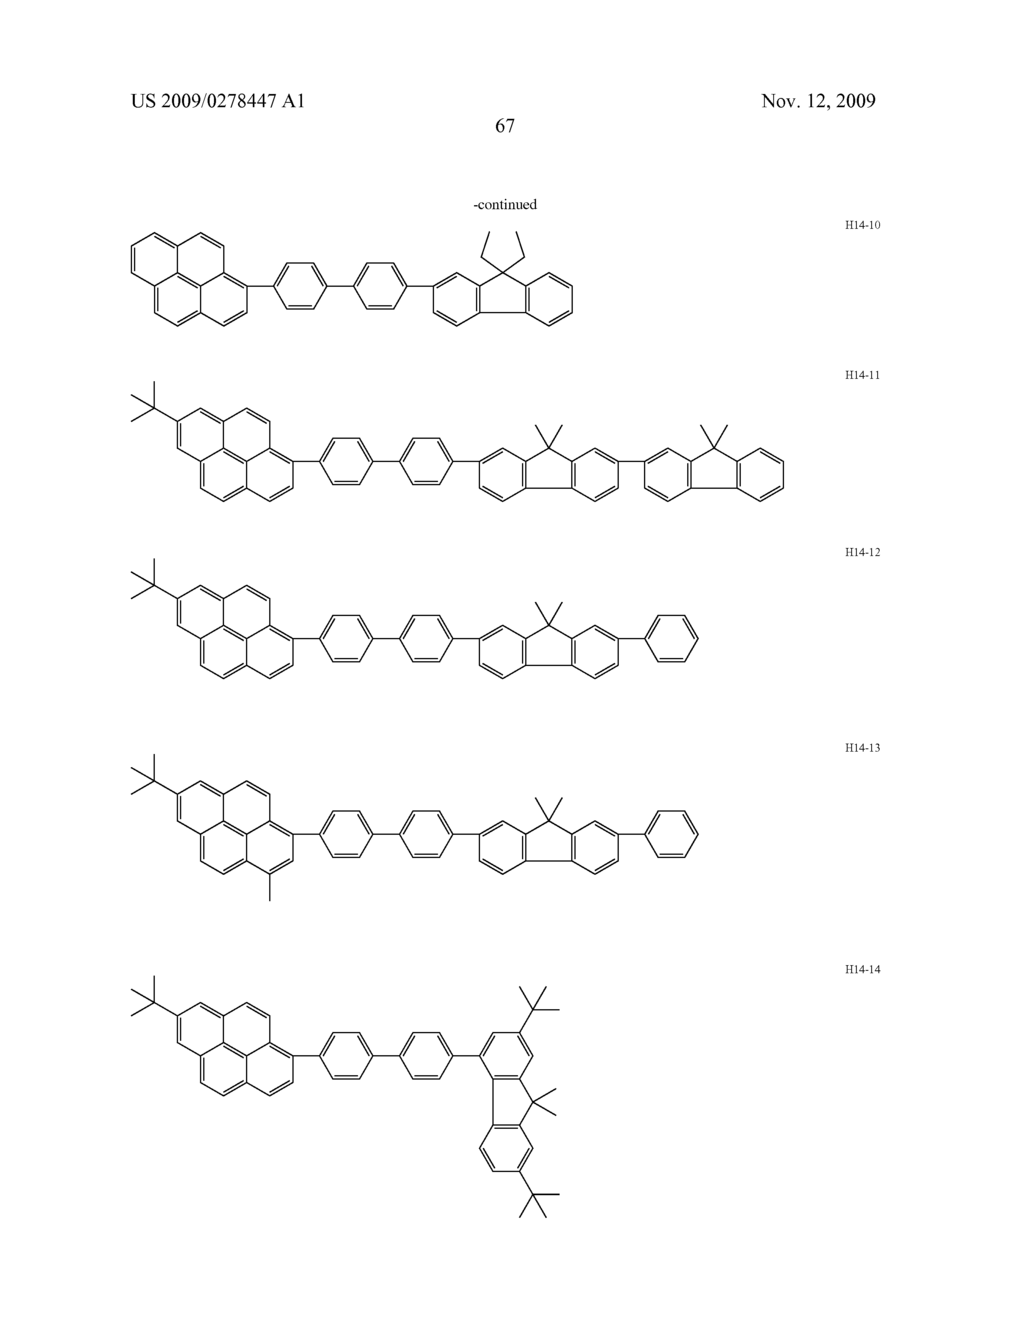 ORGANIC LUMINESCENT DEVICE AND BENZO[k]FLUORANTHENE COMPOUND - diagram, schematic, and image 73